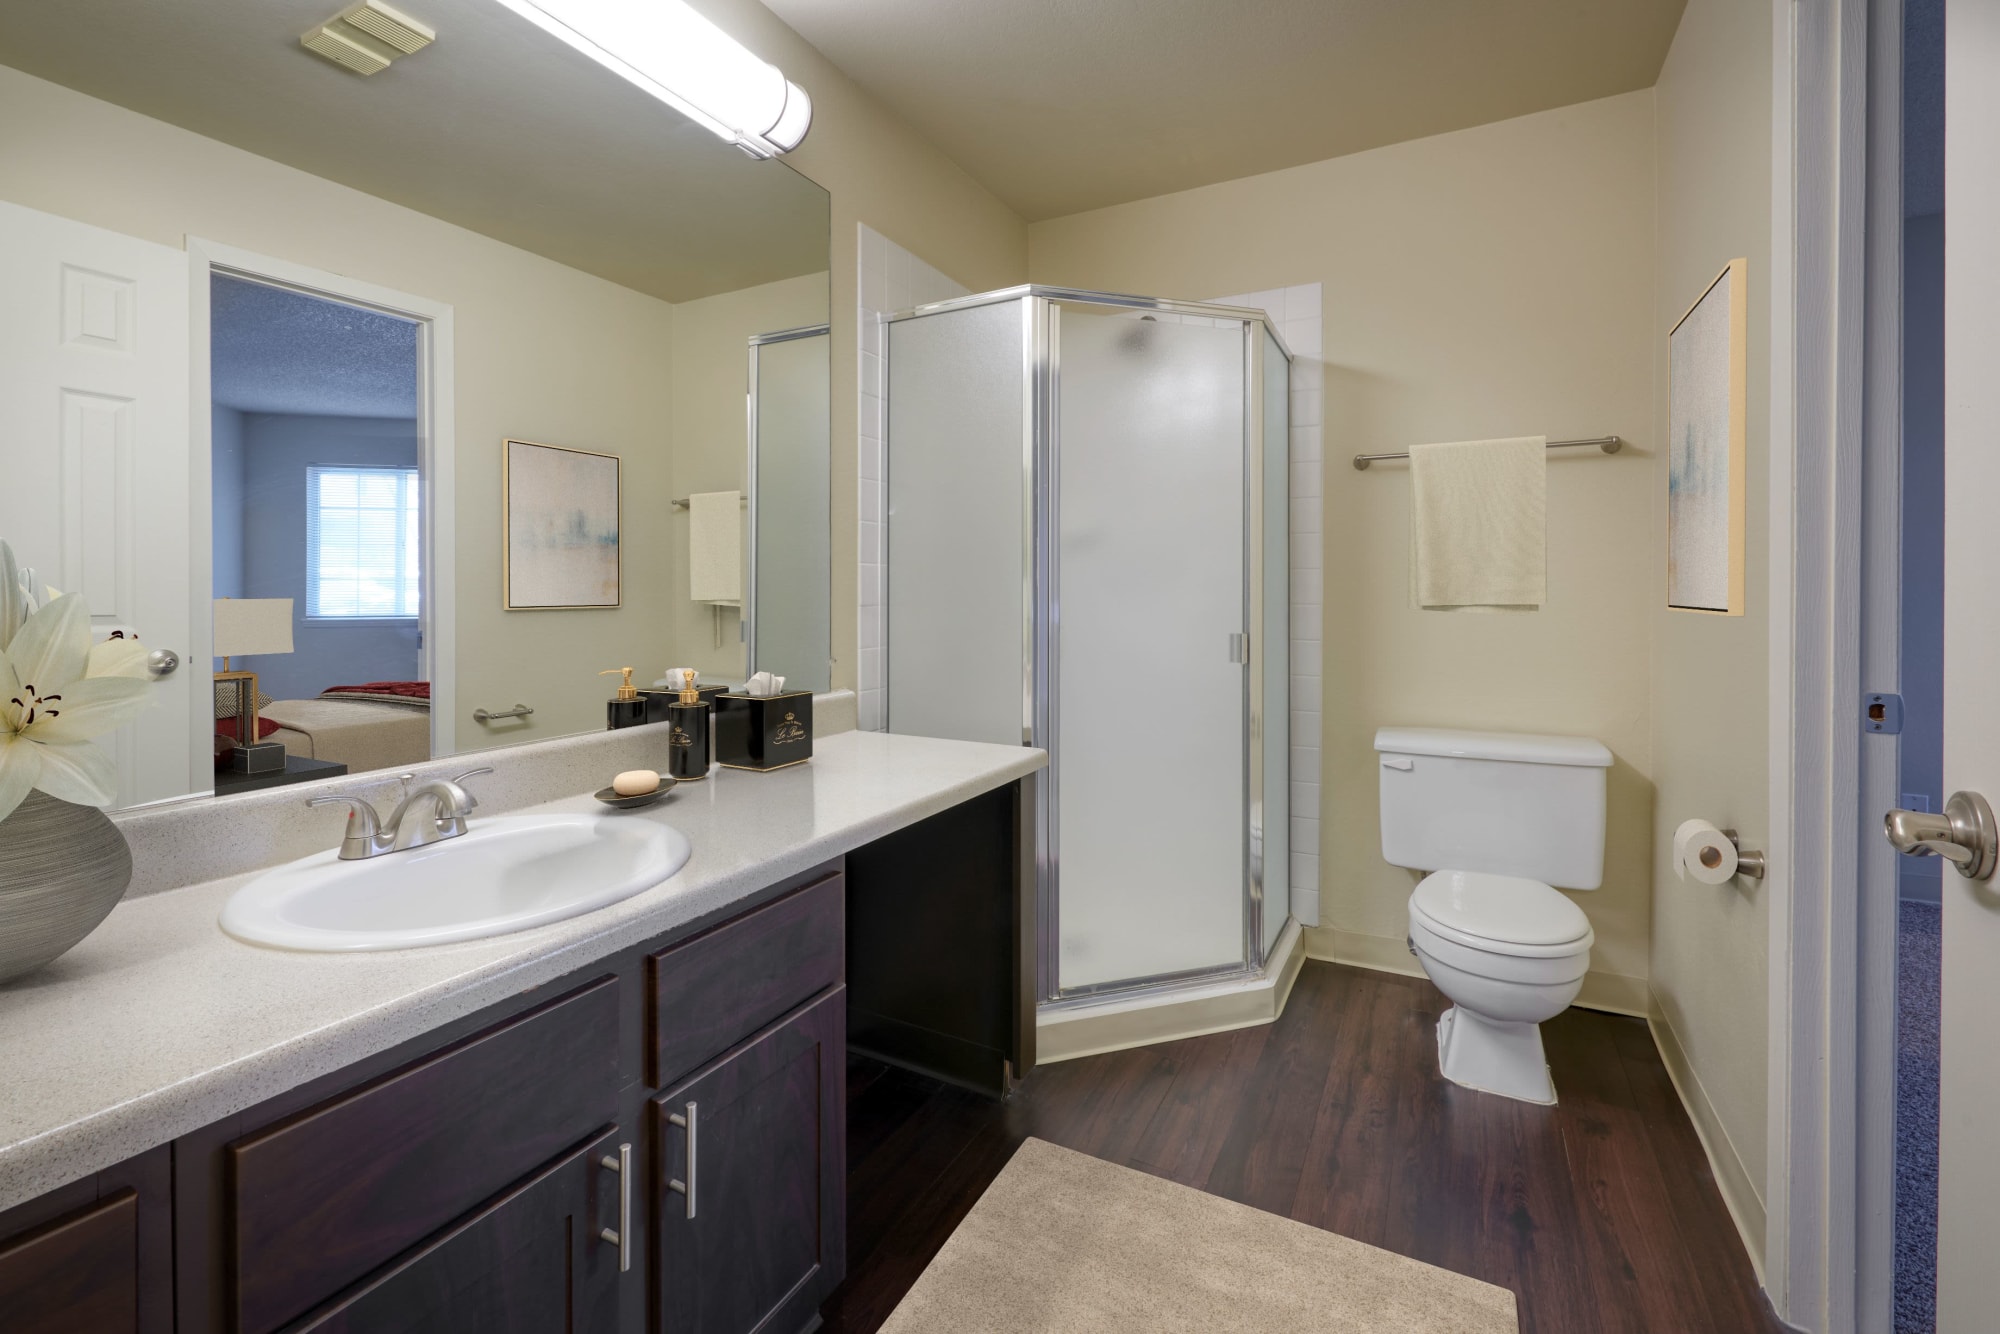 Recently renovated bathroom with brown cabinets at Bluesky Landing Apartments in Lakewood, Colorado